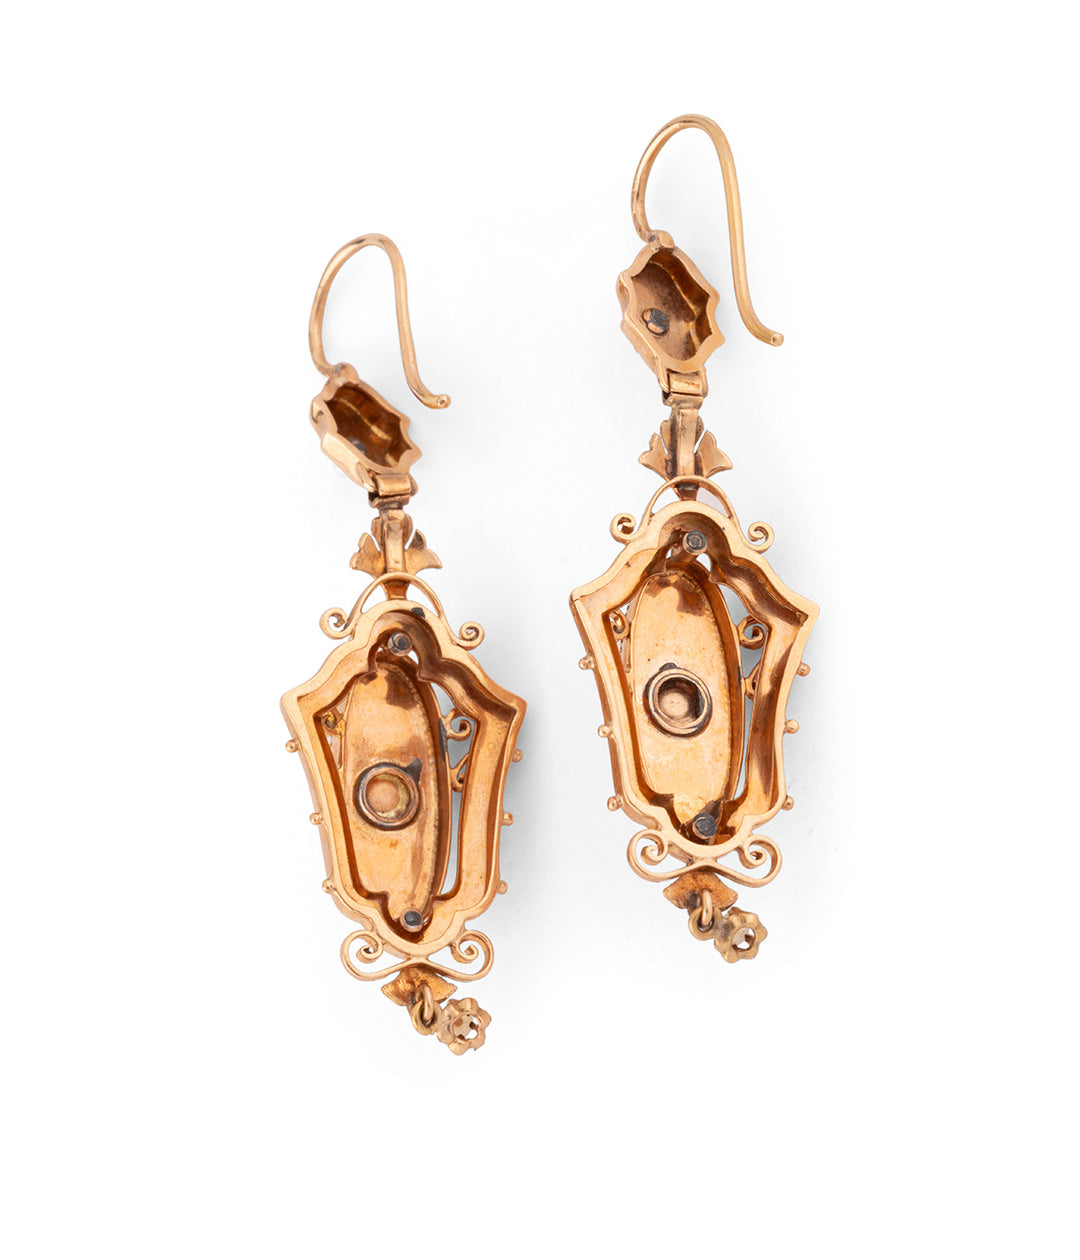 Victorian earrings gold and pearl "Ebba" - Caillou Paris 